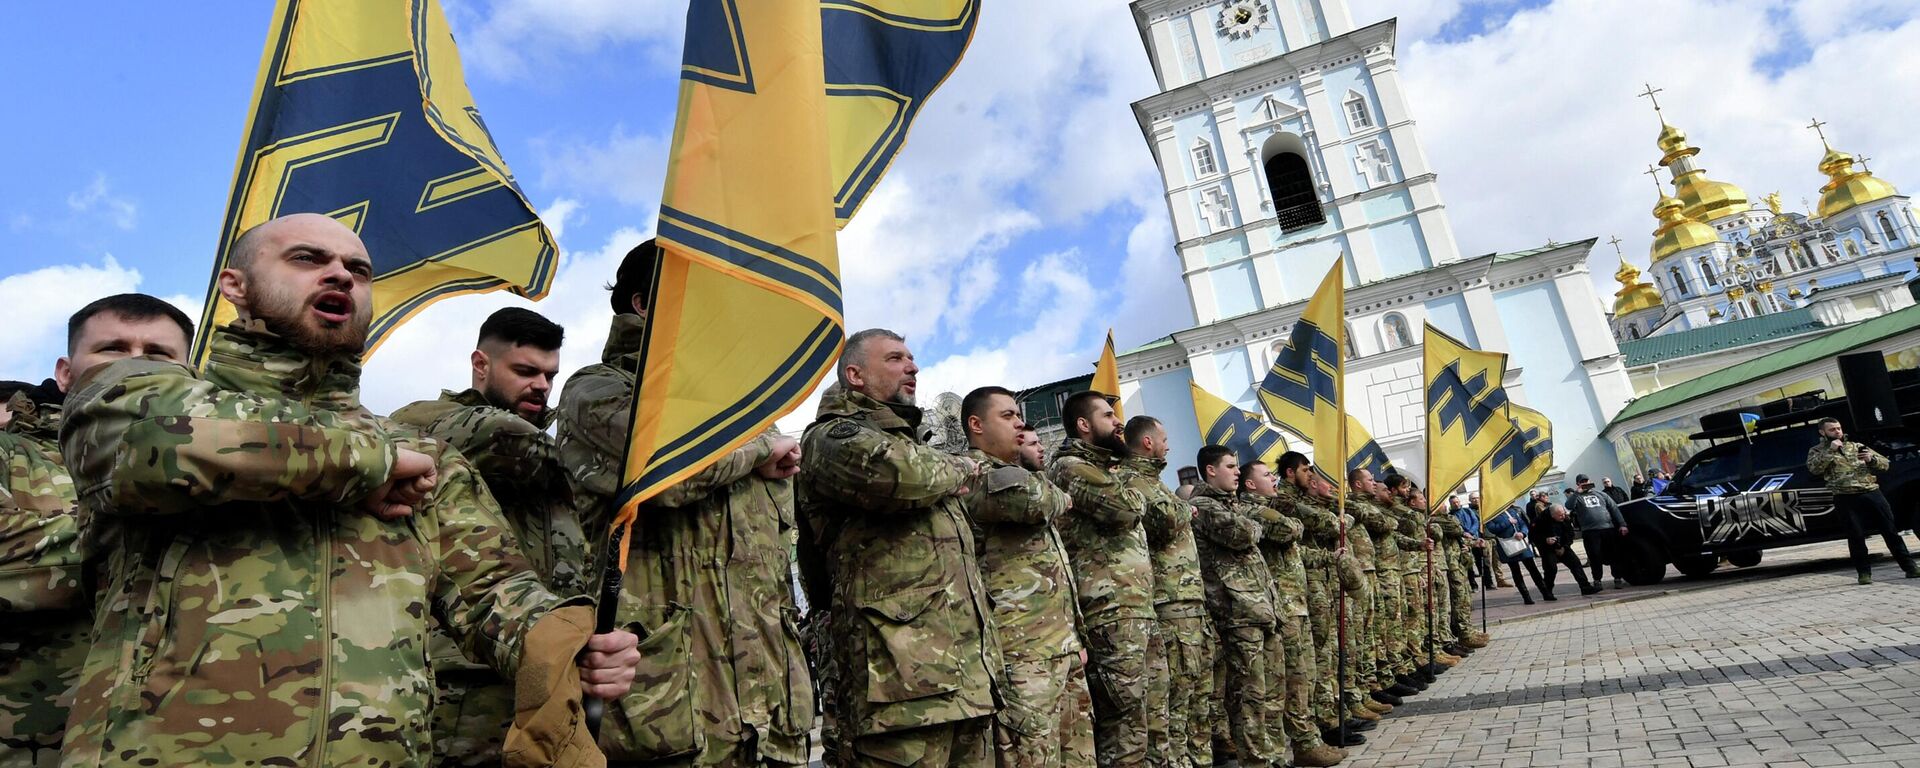 Veterans of the Azov volunteer battalion, who took part in the war in Donbass, salute during the mass rally called No surrender in Kiev on March 14, 2020. - Around fifteen thousands participants rallied despite the ban on holding mass events because of the coronavirus, demanding President Zelensky's resignation. (Photo by Sergei SUPINSKY / AFP) - Sputnik International, 1920, 11.05.2022